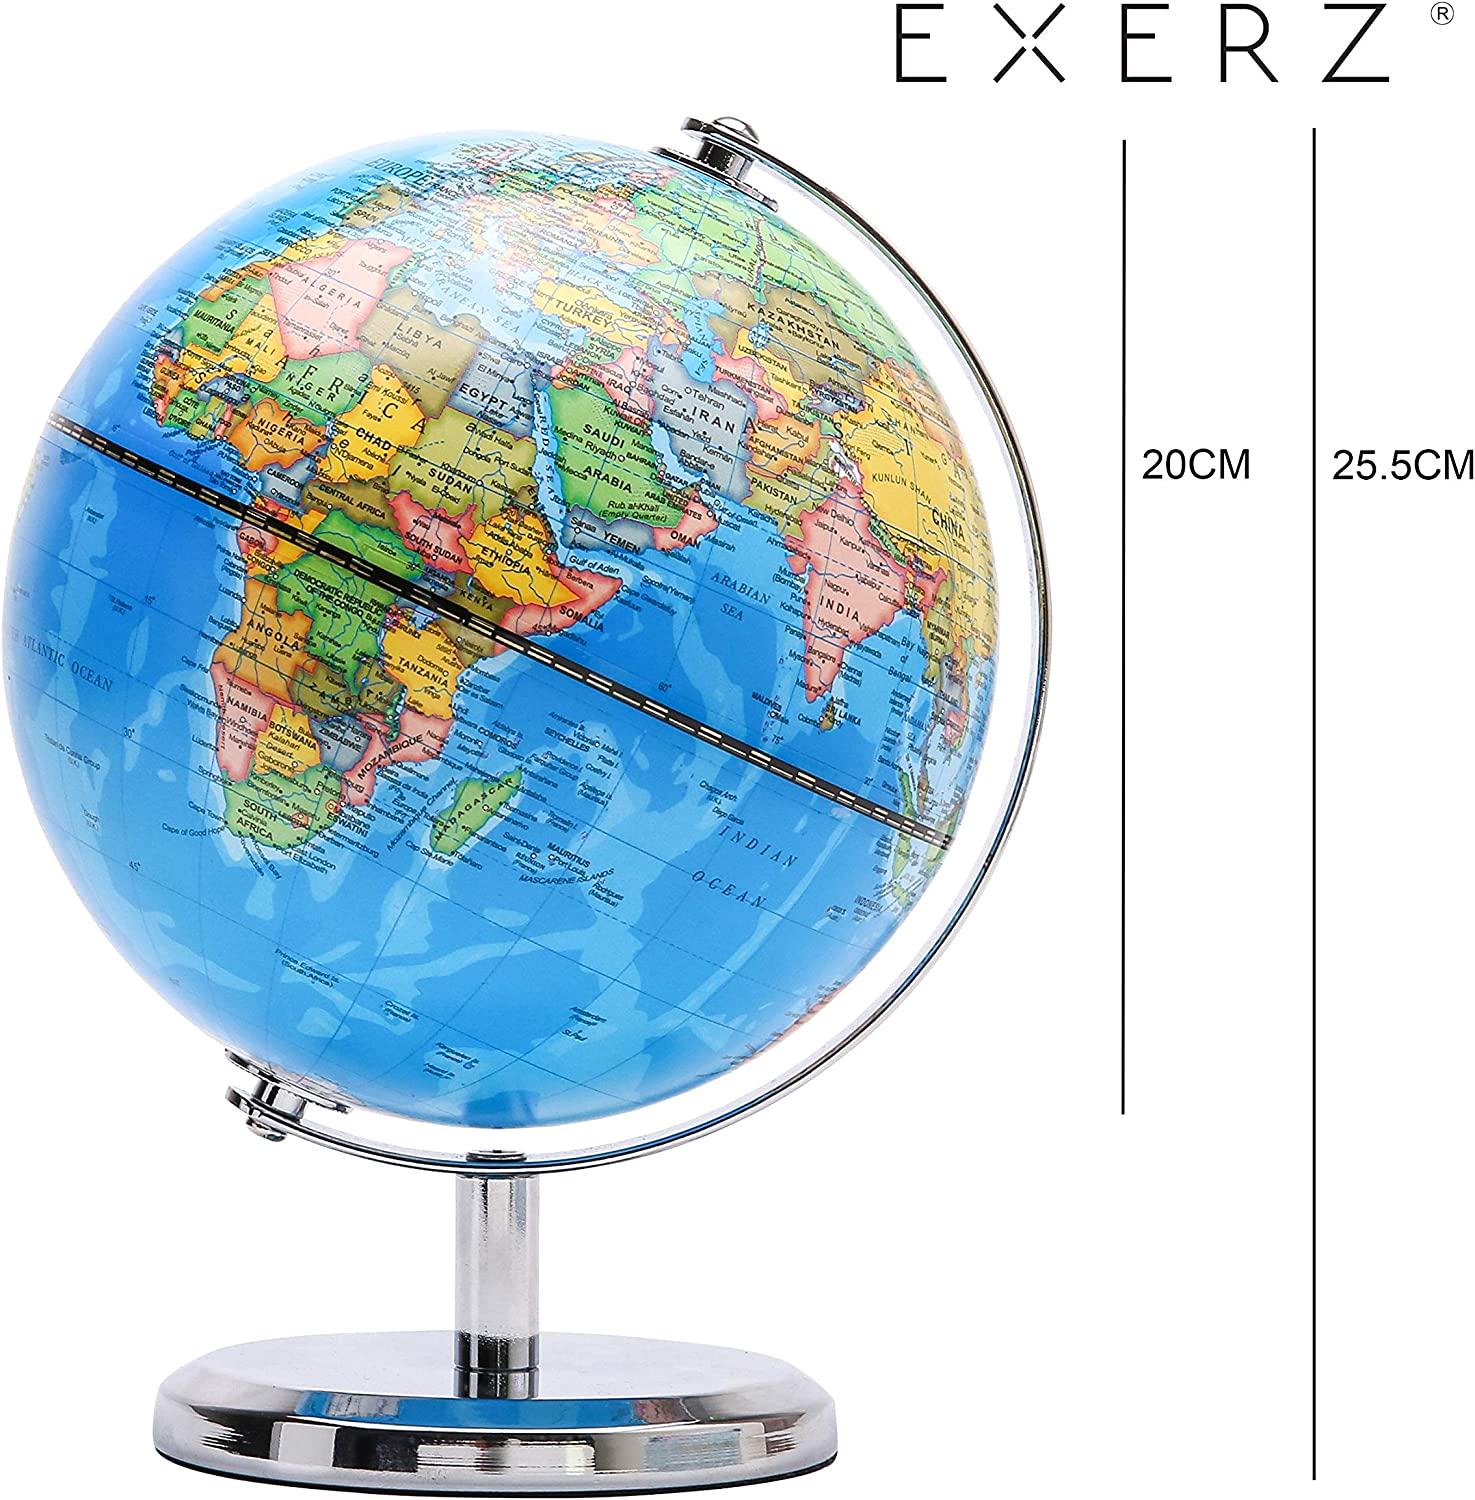 Exerz, Exerz 20cm World Globe - Educational/Geographic/Modern Desktop Decoration - Stainless Steel Arc and Base - for School, Home, and Office (20cm Blue Political)